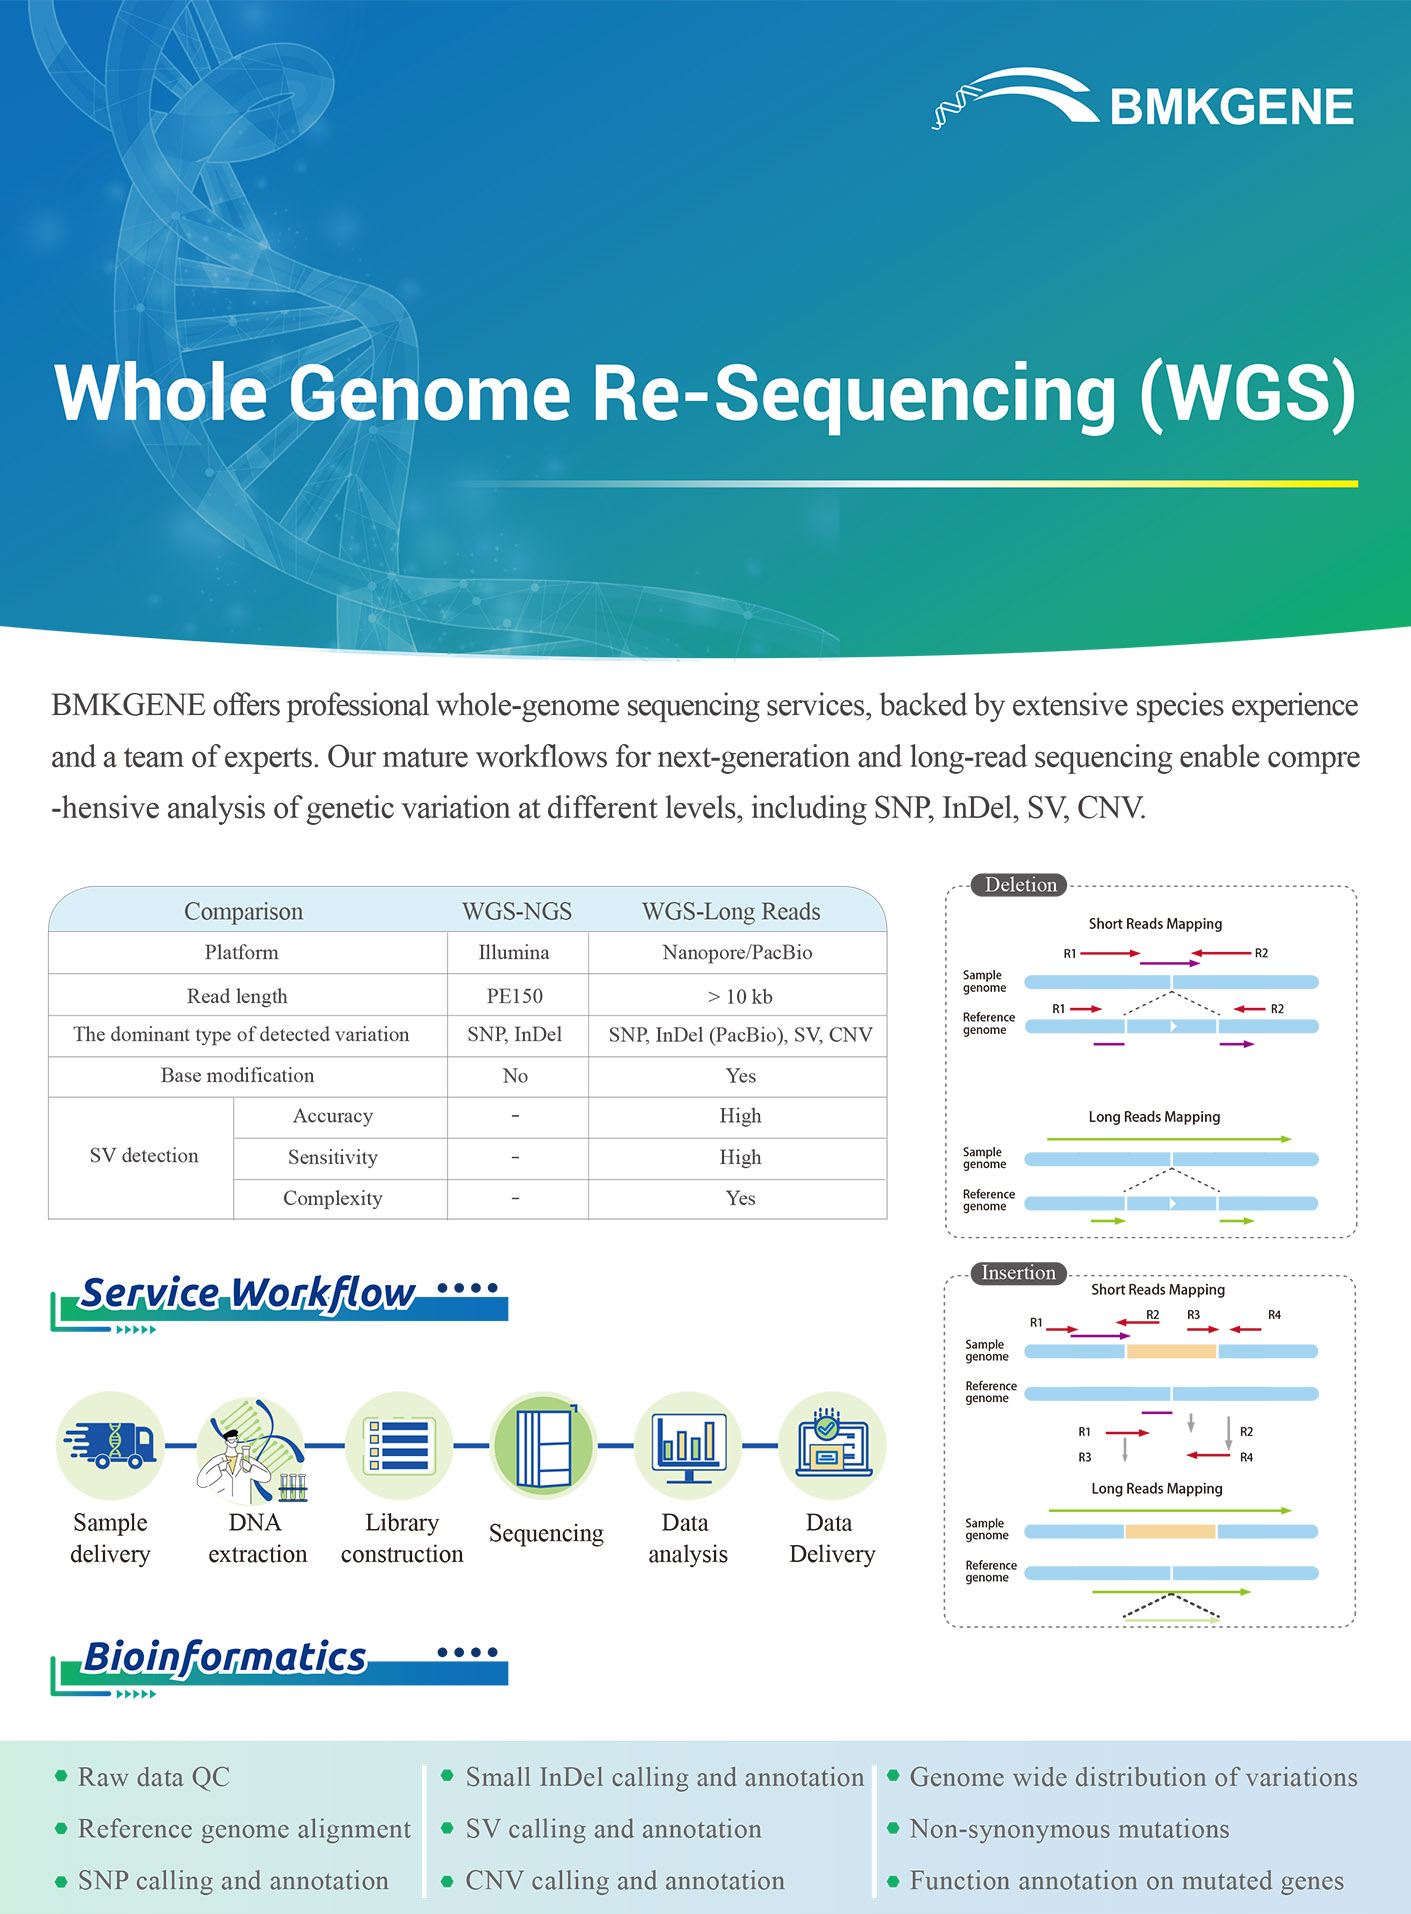 https://www.bmkgene.com/uploads/Plant-and-Animal-Whole-Genome-Re-Sequencing-PA-WGS-BMKGENE-2310.pdf